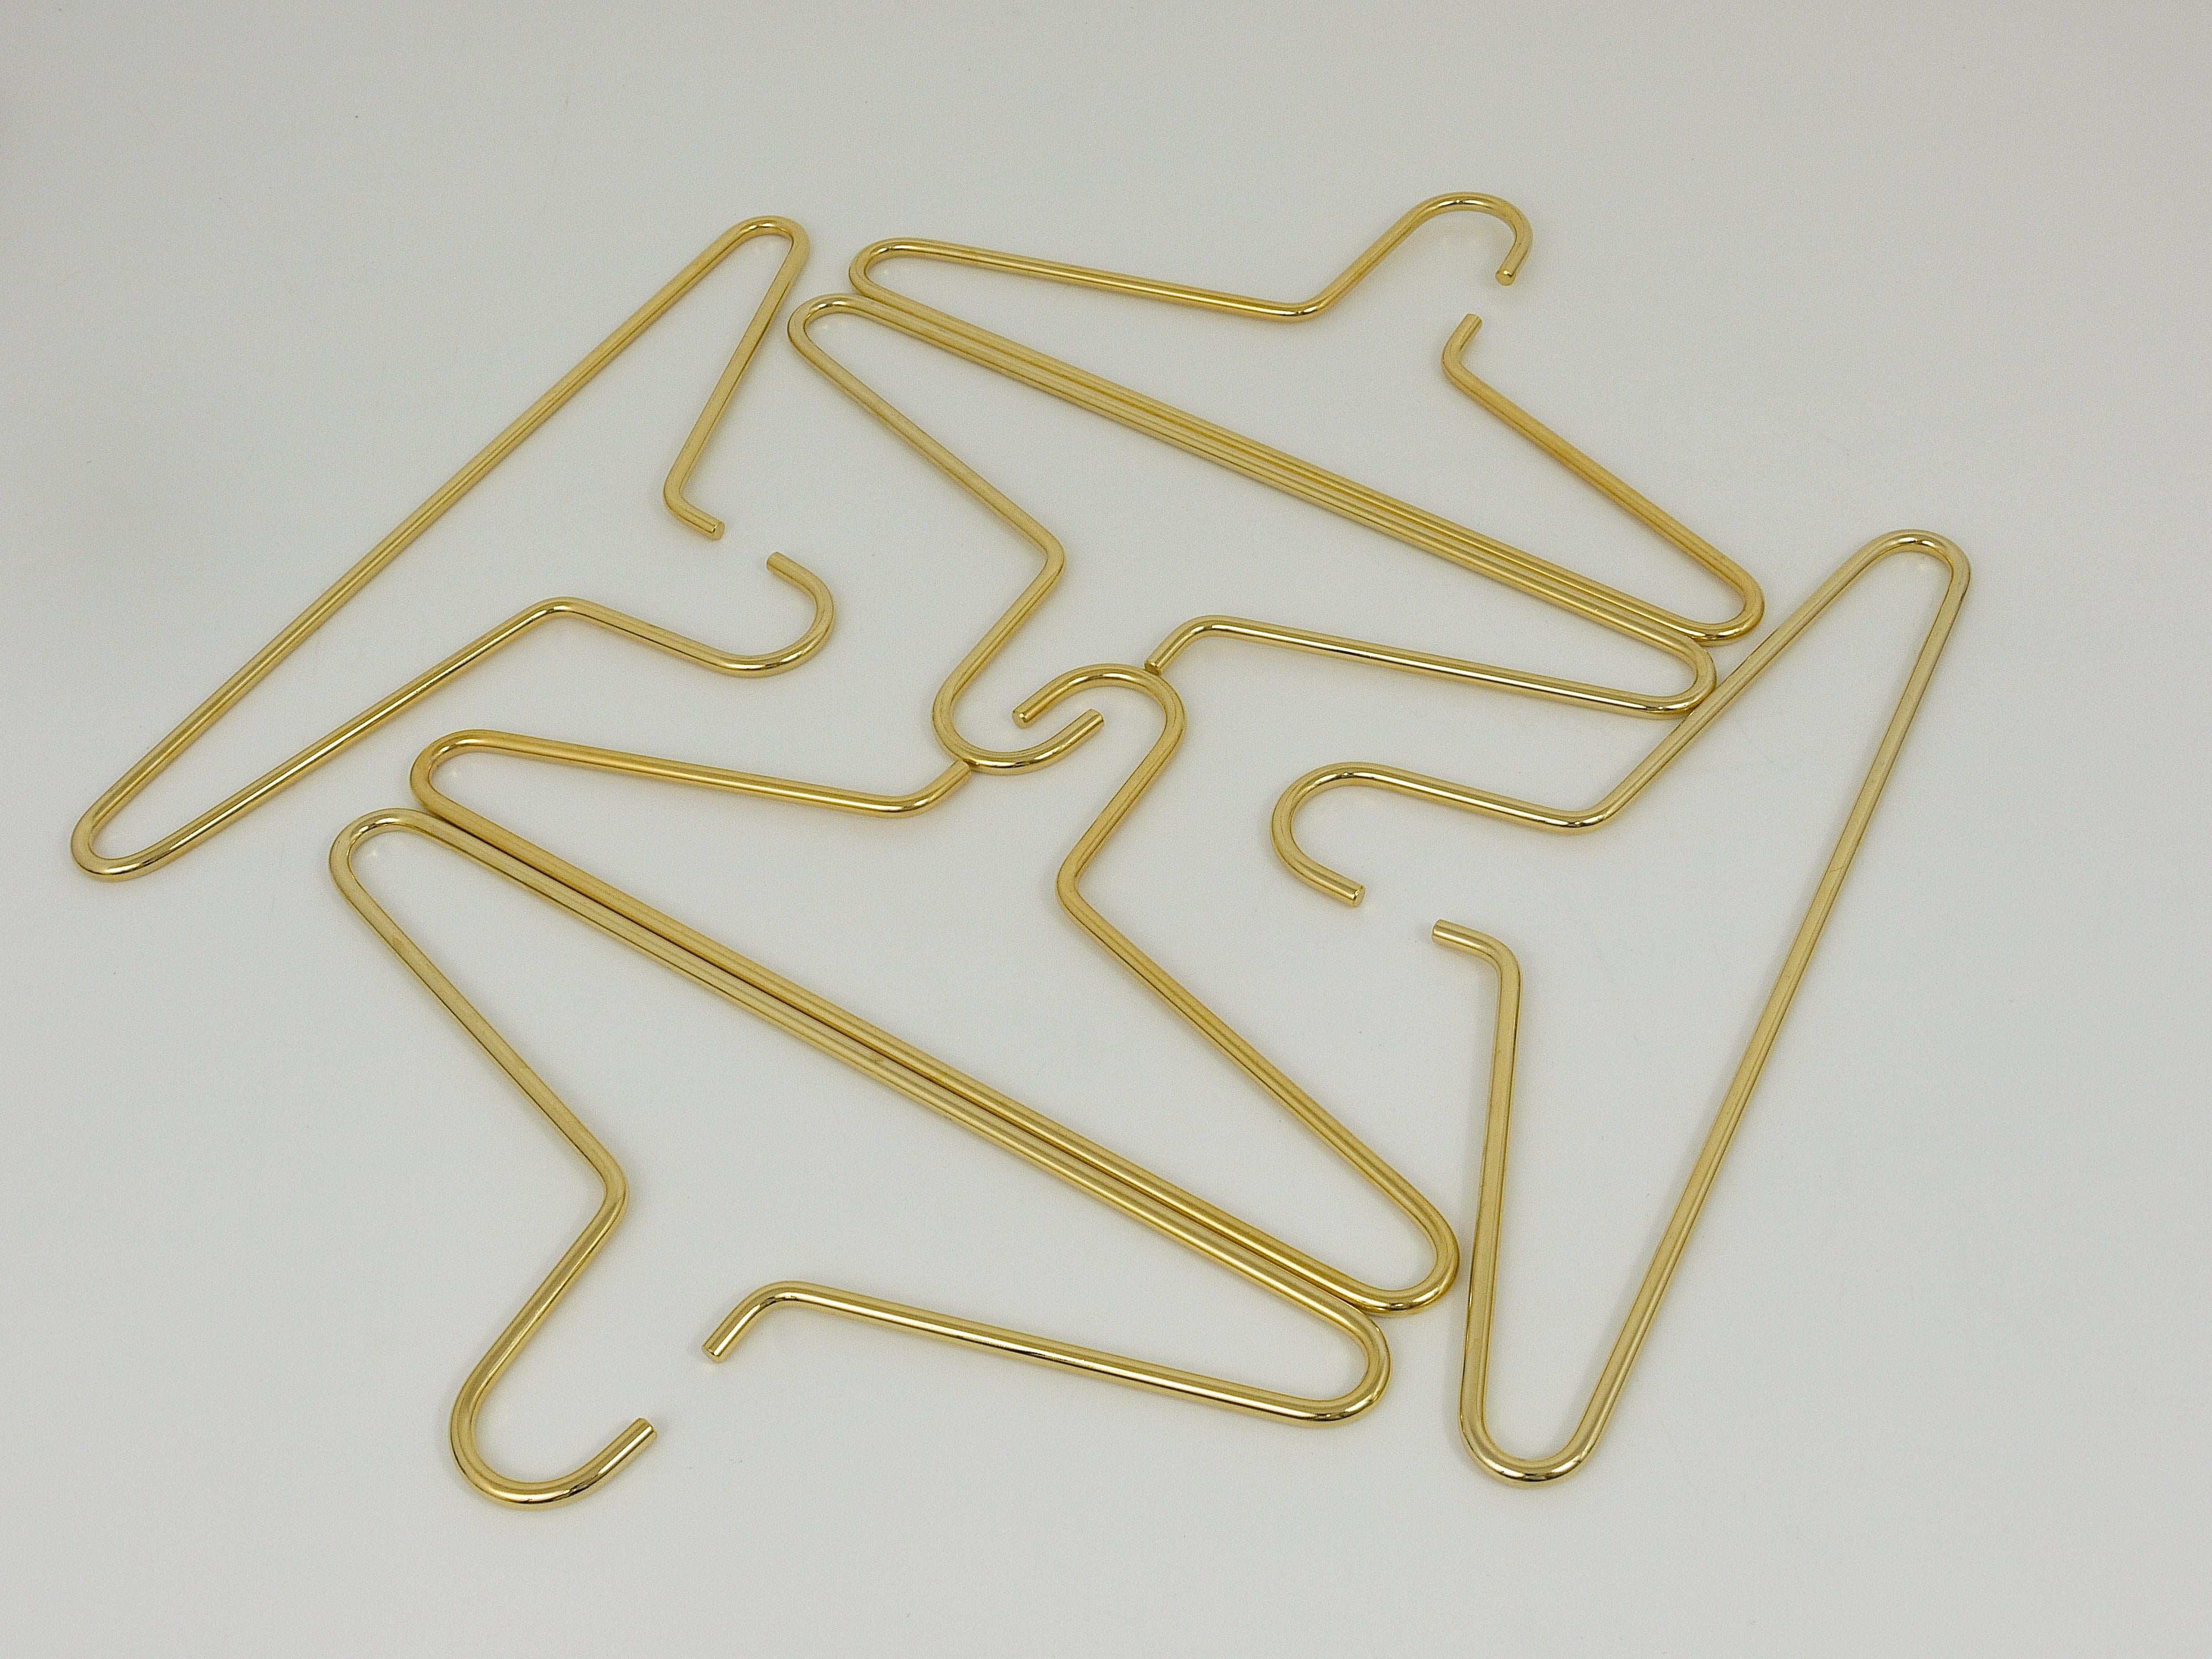 Up to 12 Austrian Modernist Solid Gold-Plated Coat Hangers from the 1970s For Sale 1